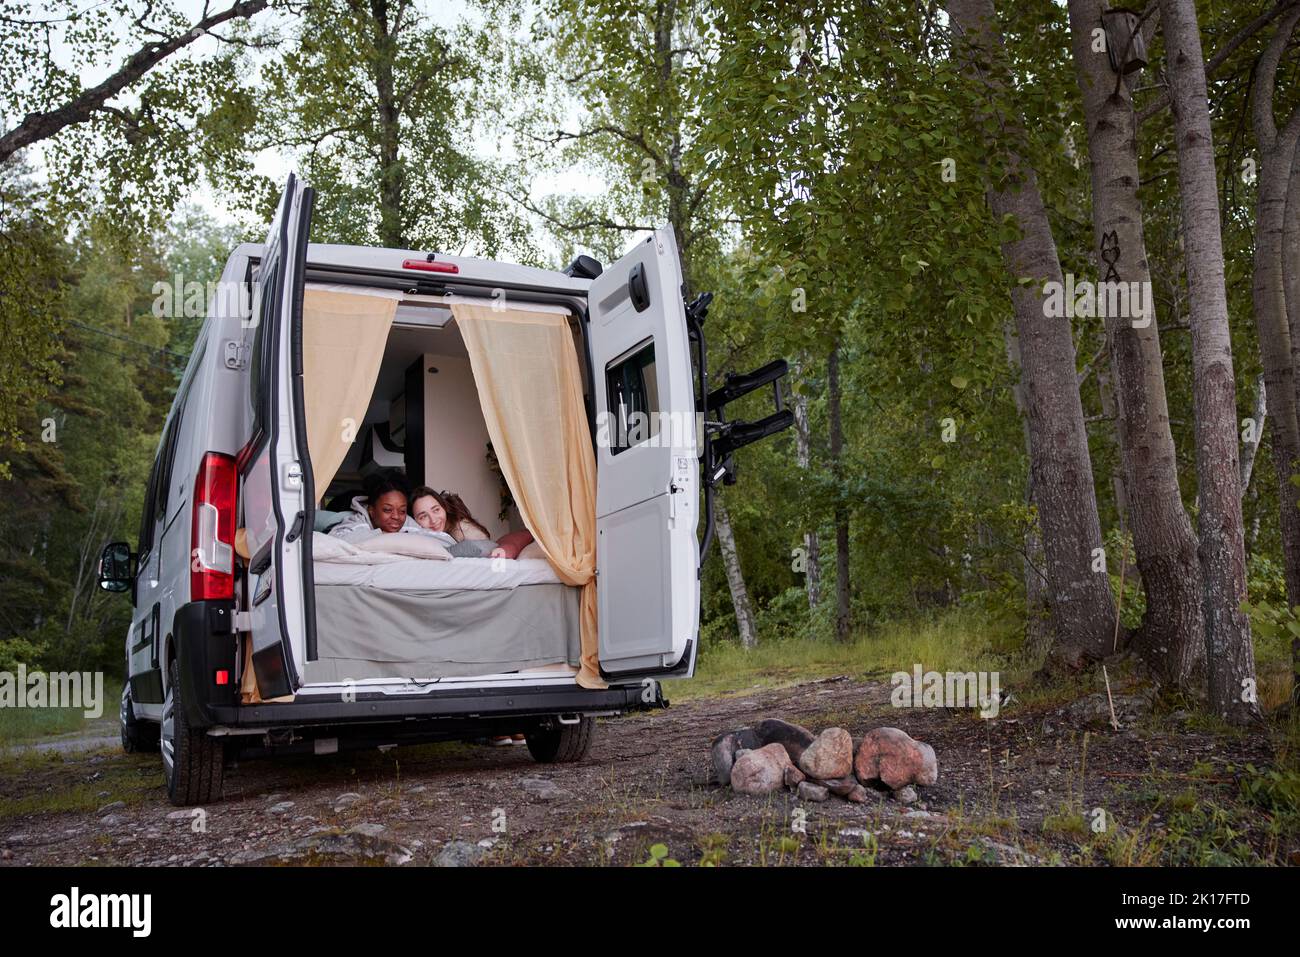 Women lying in bed in camper van parked in forest Stock Photo